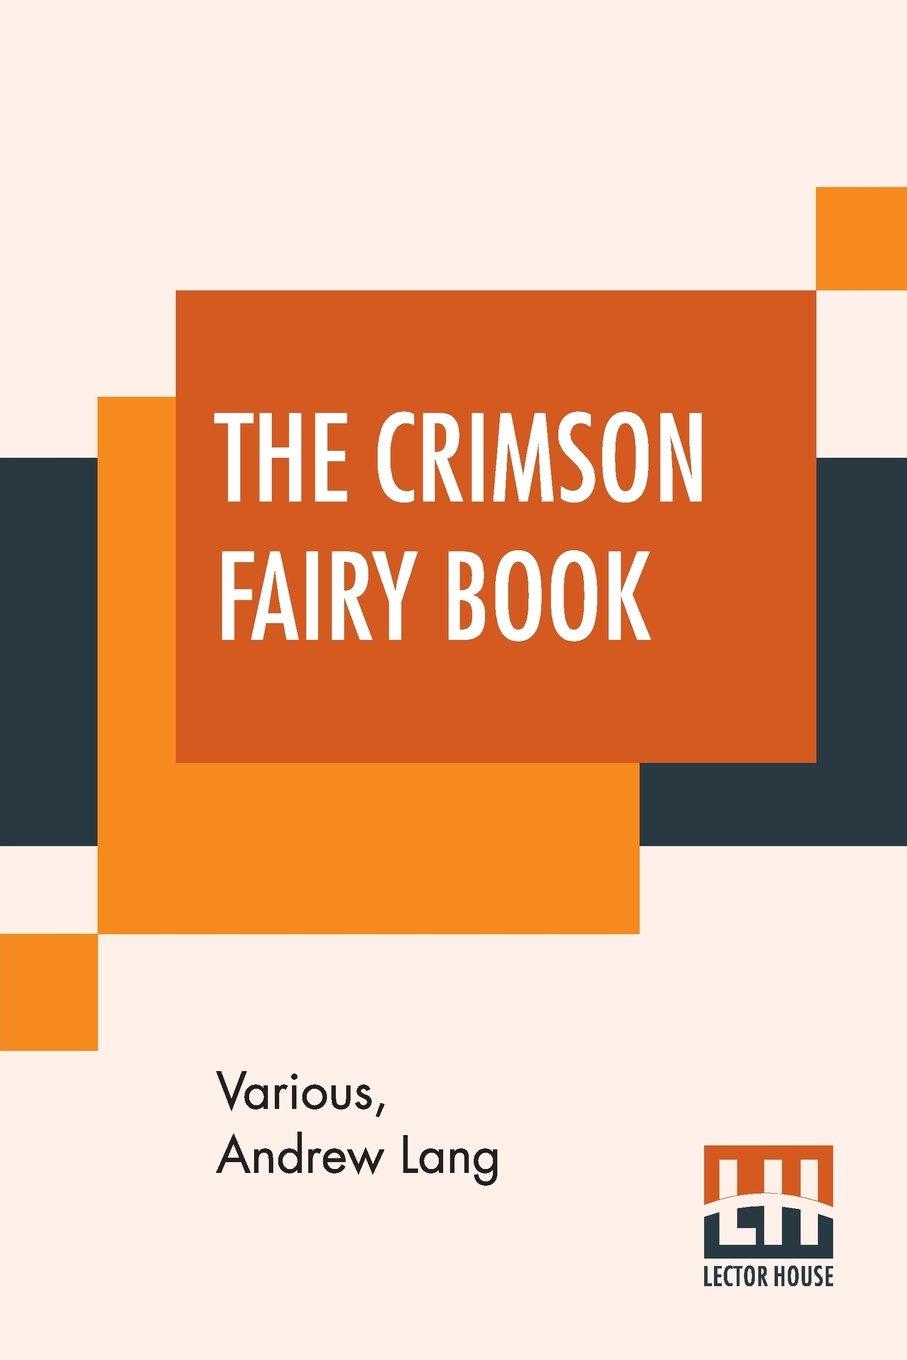 The Crimson Fairy Book. Edited By Andrew Lang